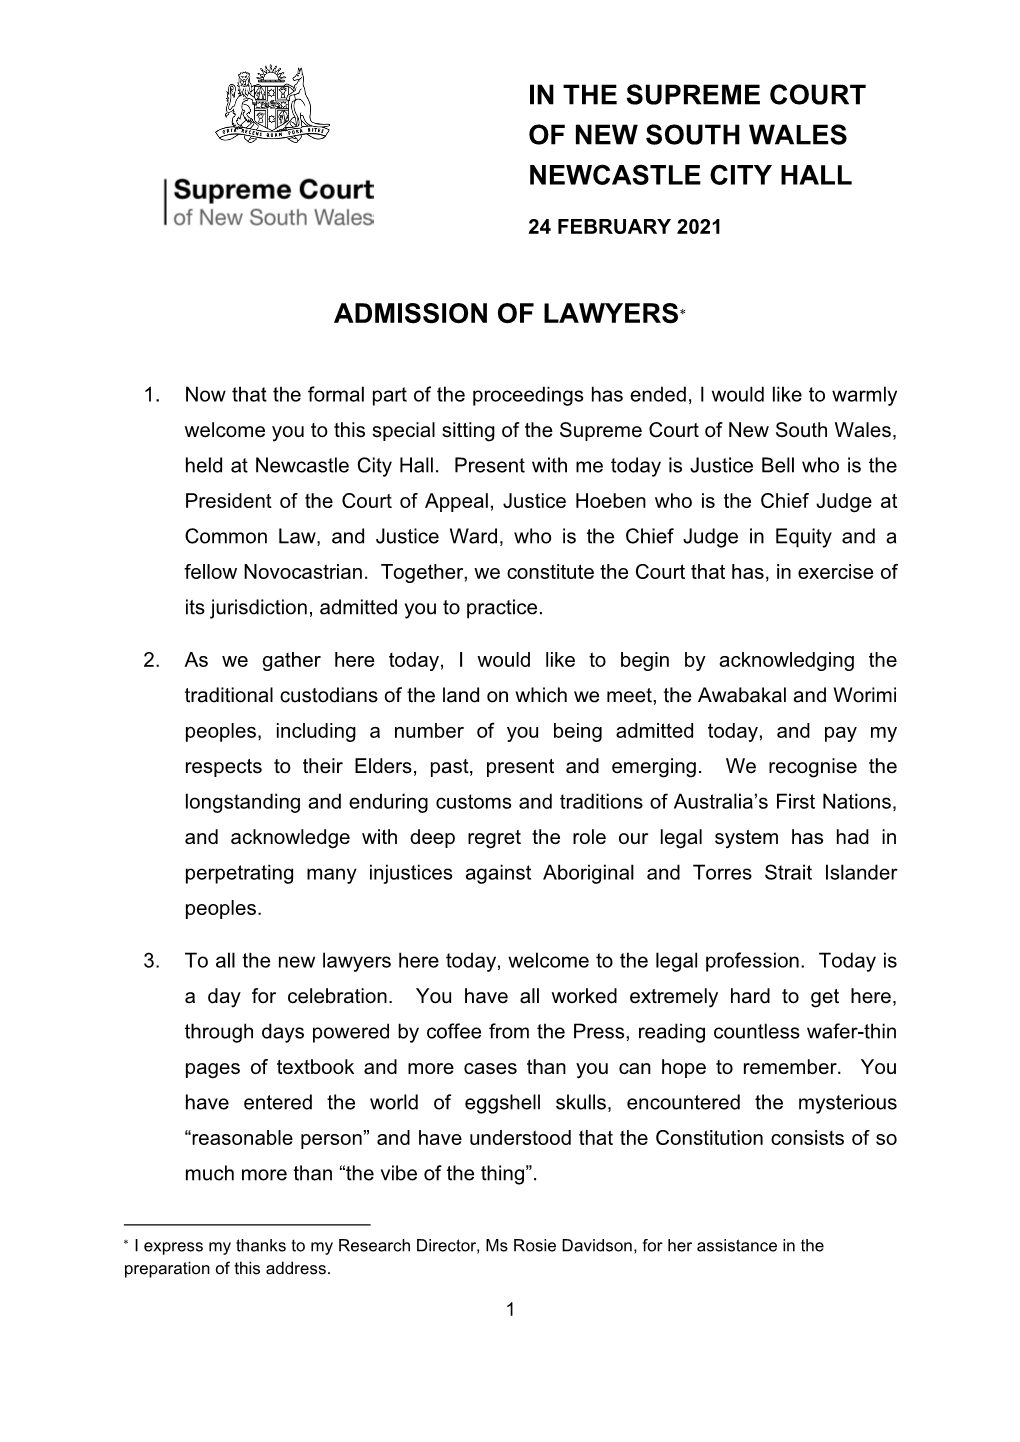 Admission of Lawyers* in the Supreme Court of New